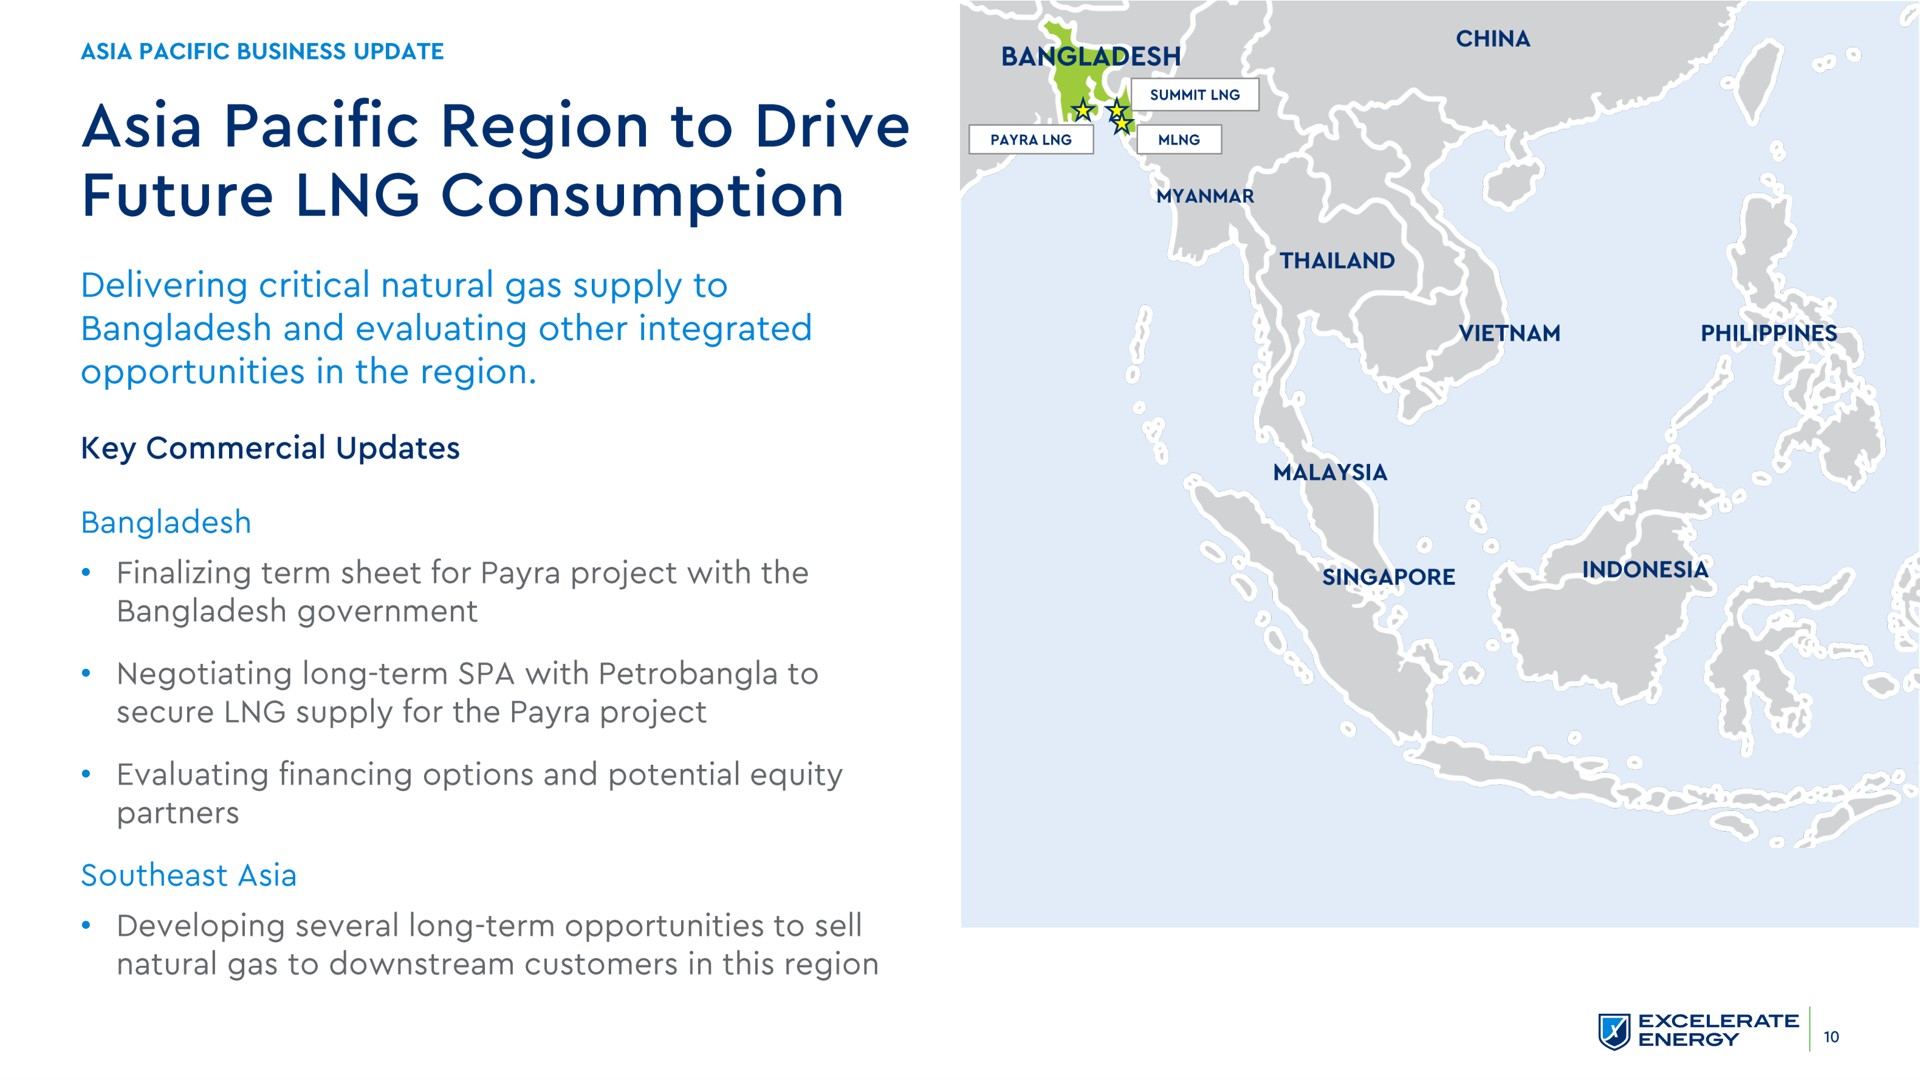 pacific region to drive future consumption maw me van | Excelerate Energy